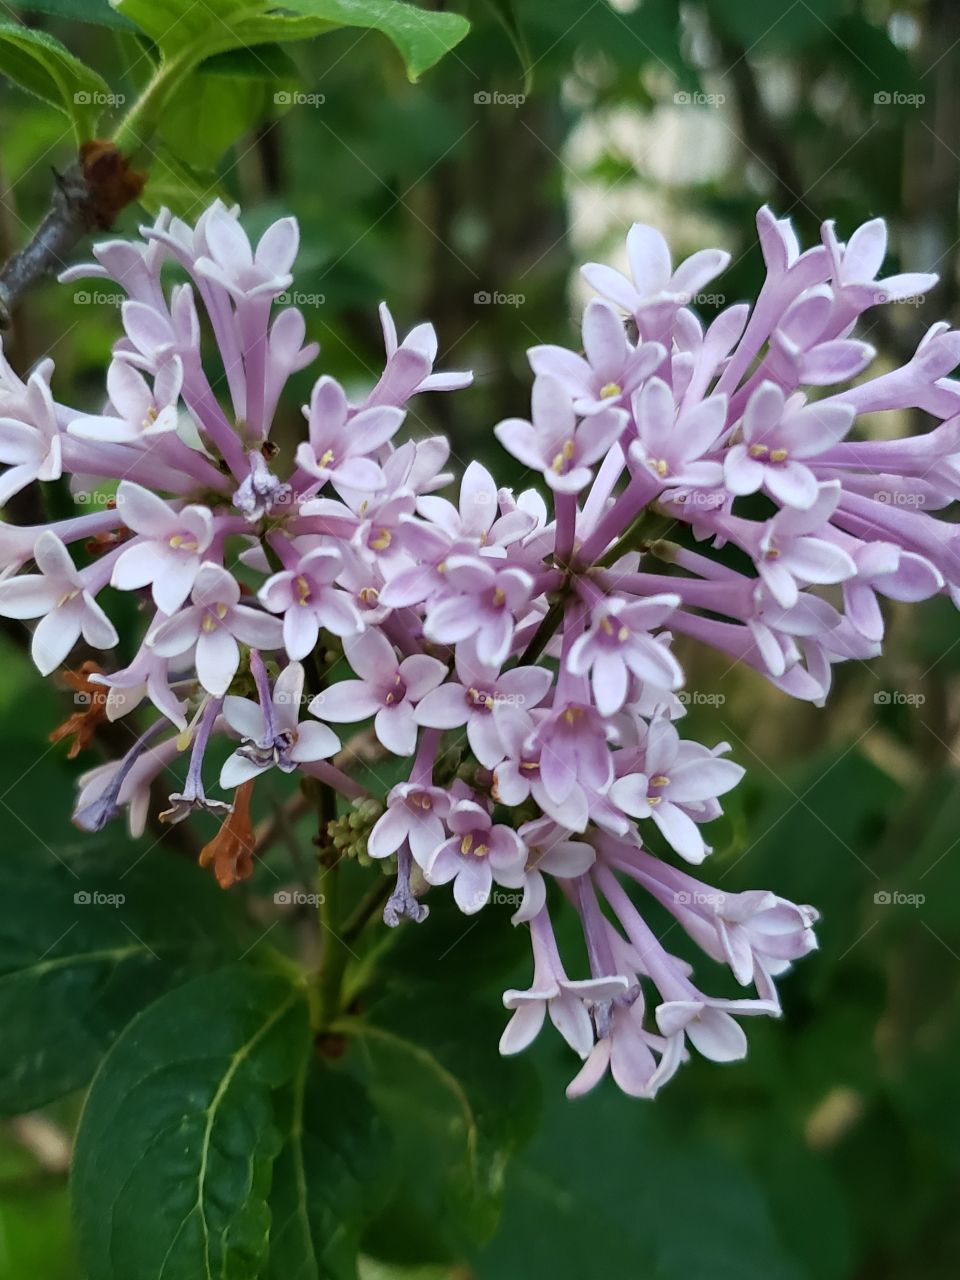 Lilacs are in bloom